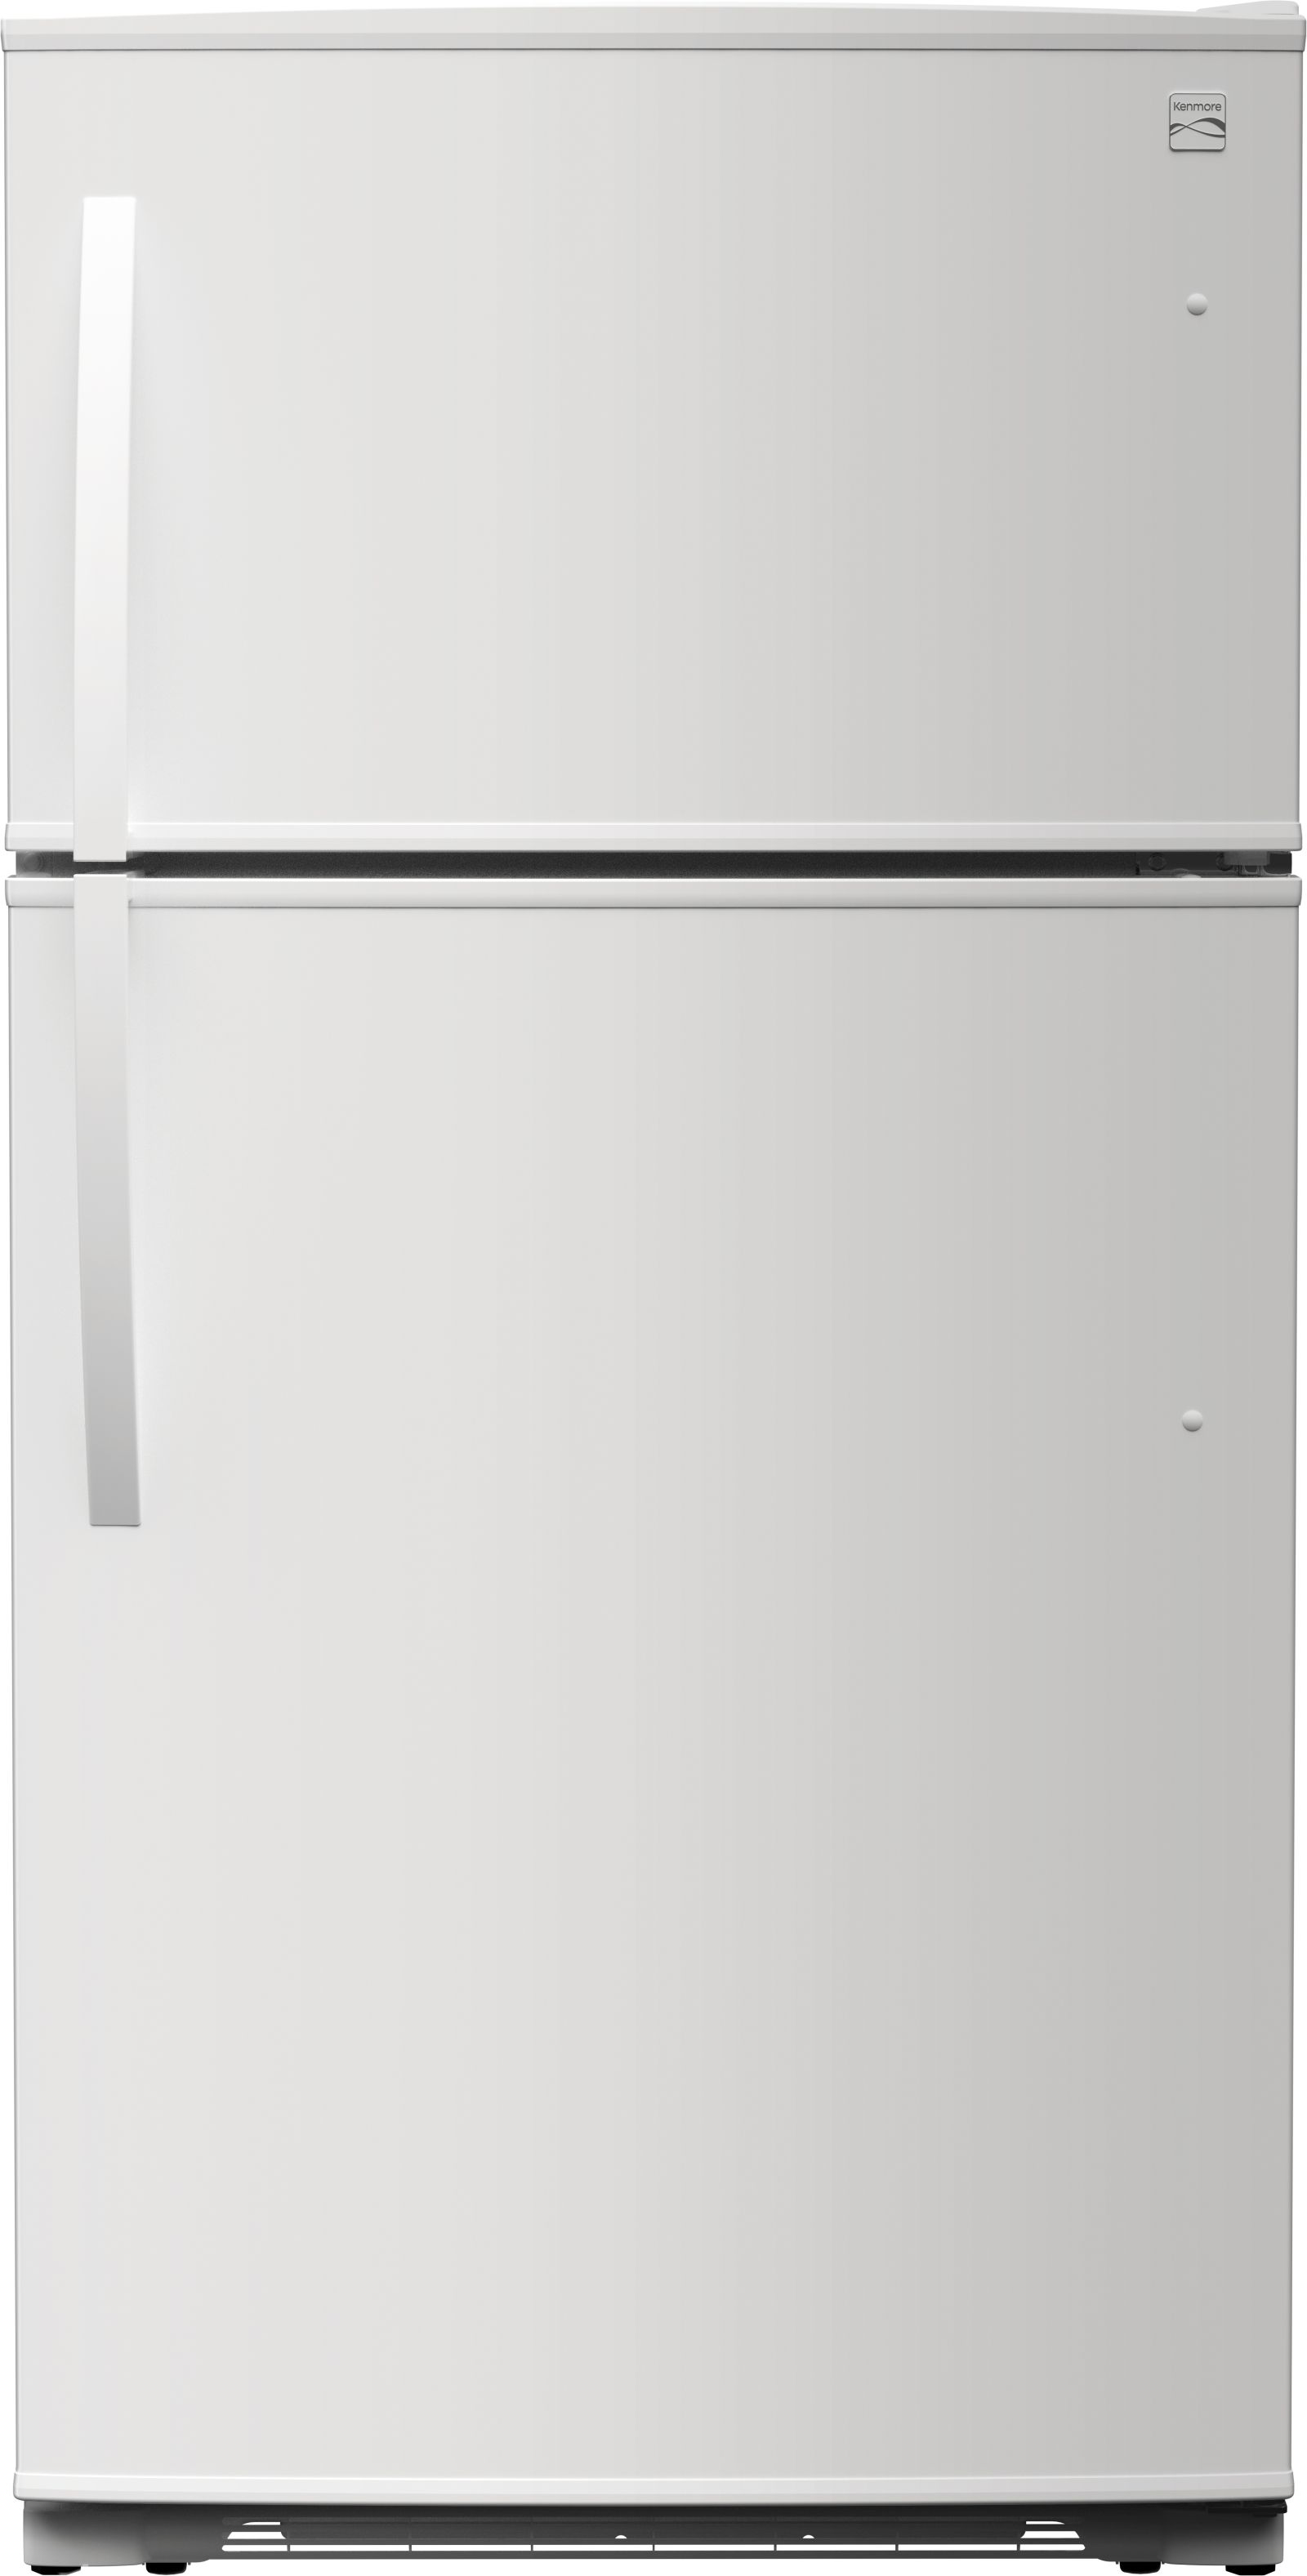 Kenmore 61202 21 Cu Ft Top Freezer, How To Put Shelves Back In Kenmore Refrigerator